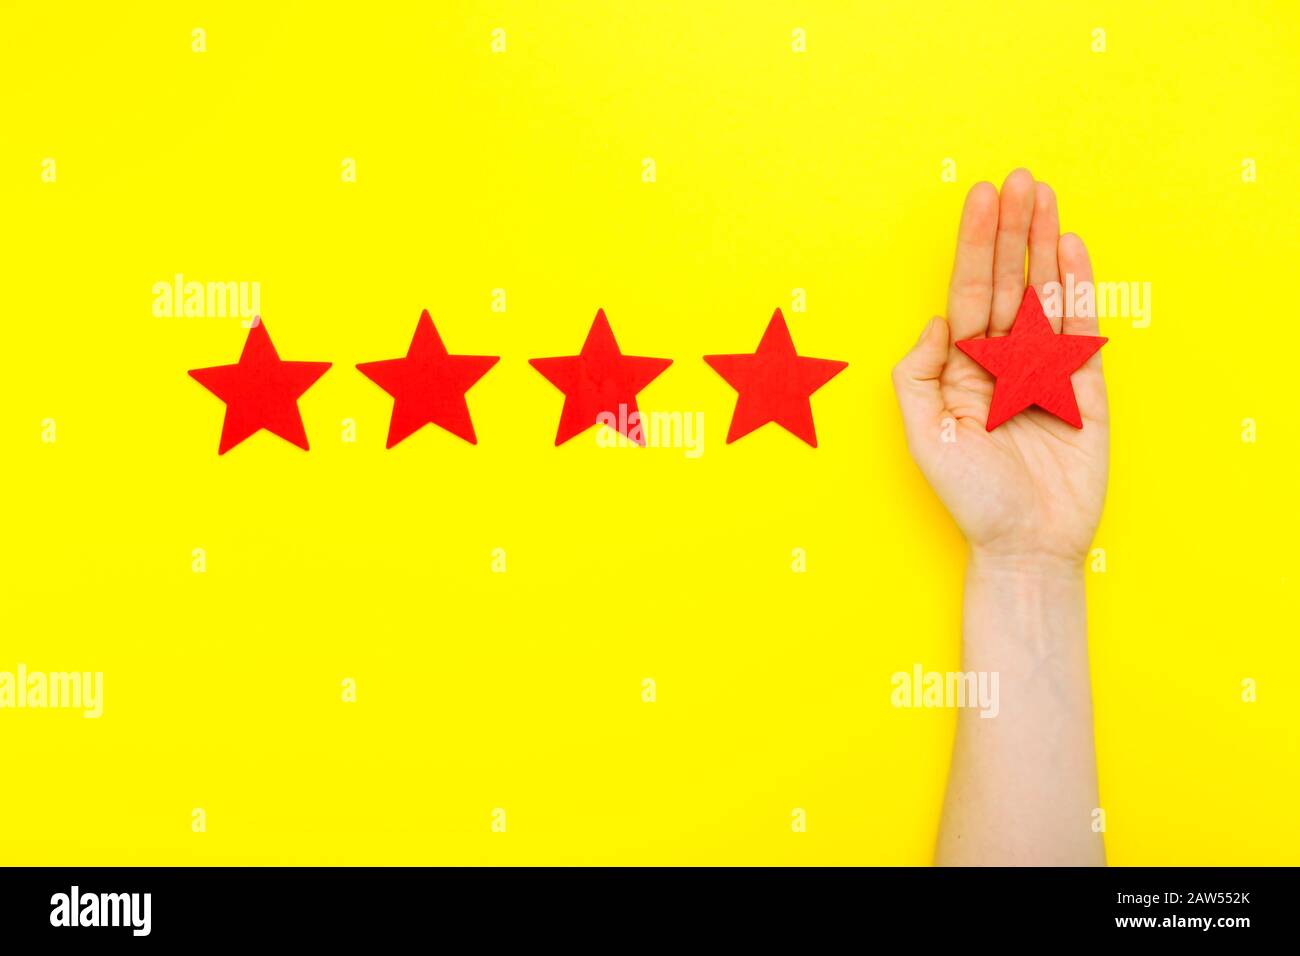 5 stars increase rating, customer experience concept. Hand of client show putting 5 star symbol to increase Service rating. five red stars excellent Stock Photo